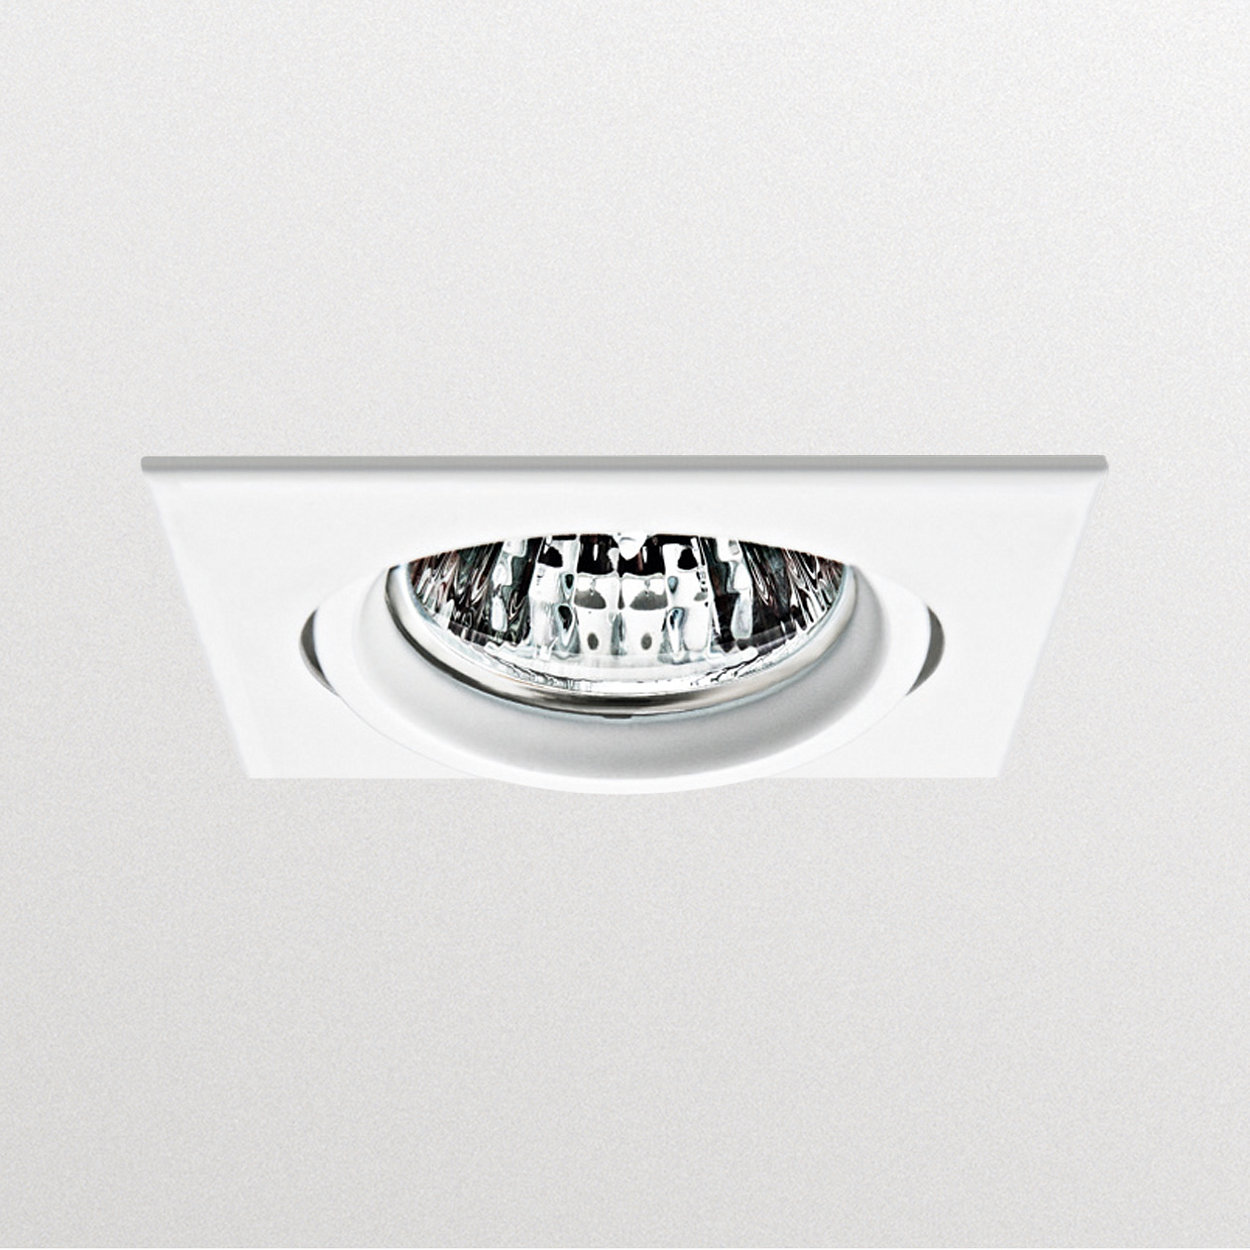 Smart Halogen Downlight – a reliable way to make your merchandise stand out